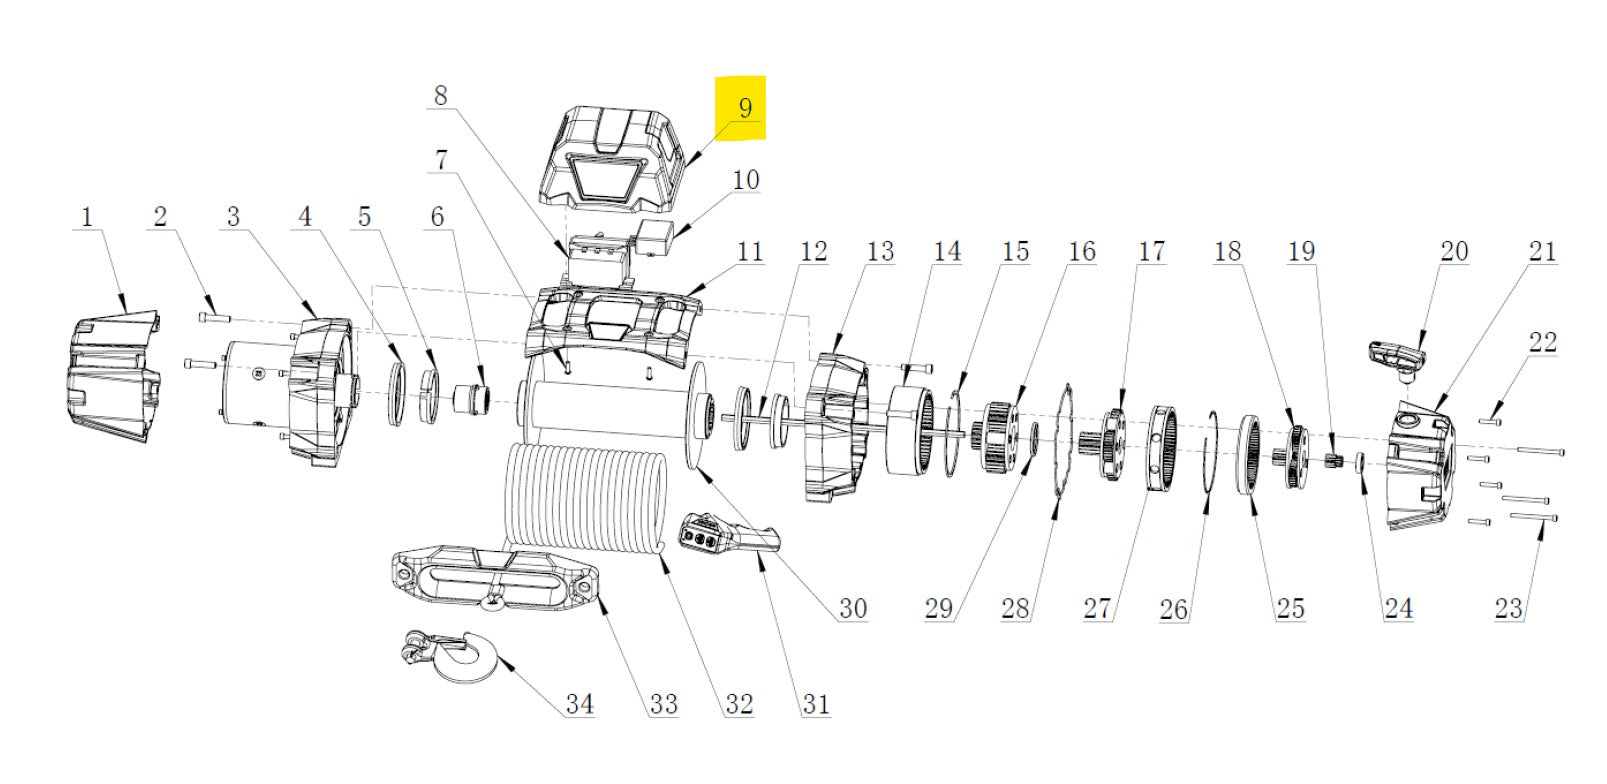 Parts drawing showing location of the parts